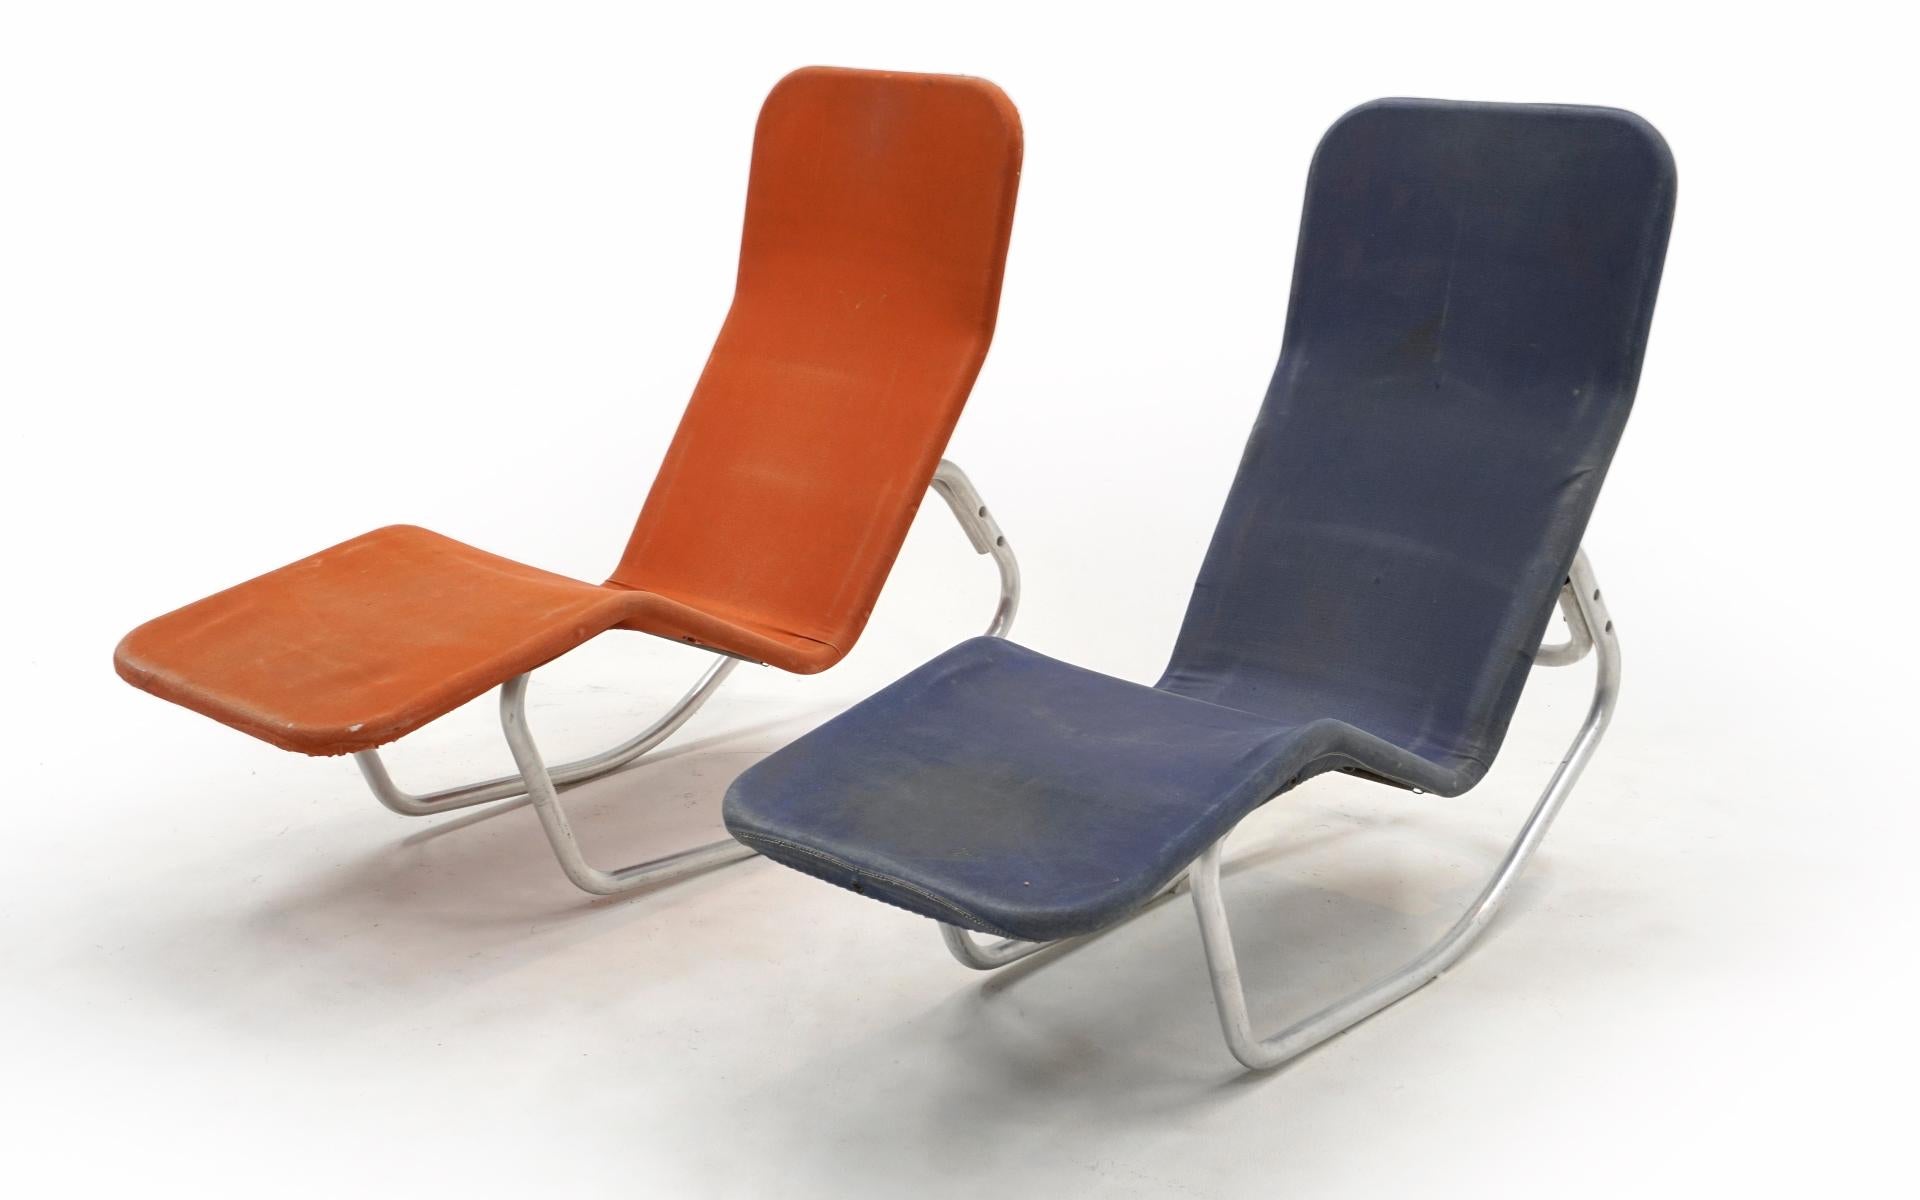 Two 1940s Barwa indoor / outdoor chaise lounge chairs with the original orange and blue canvas covers over the tubular aluminum frame. Very light weight, sturdy and functional. Lean back and the chair reclines. These were designed by Edgar